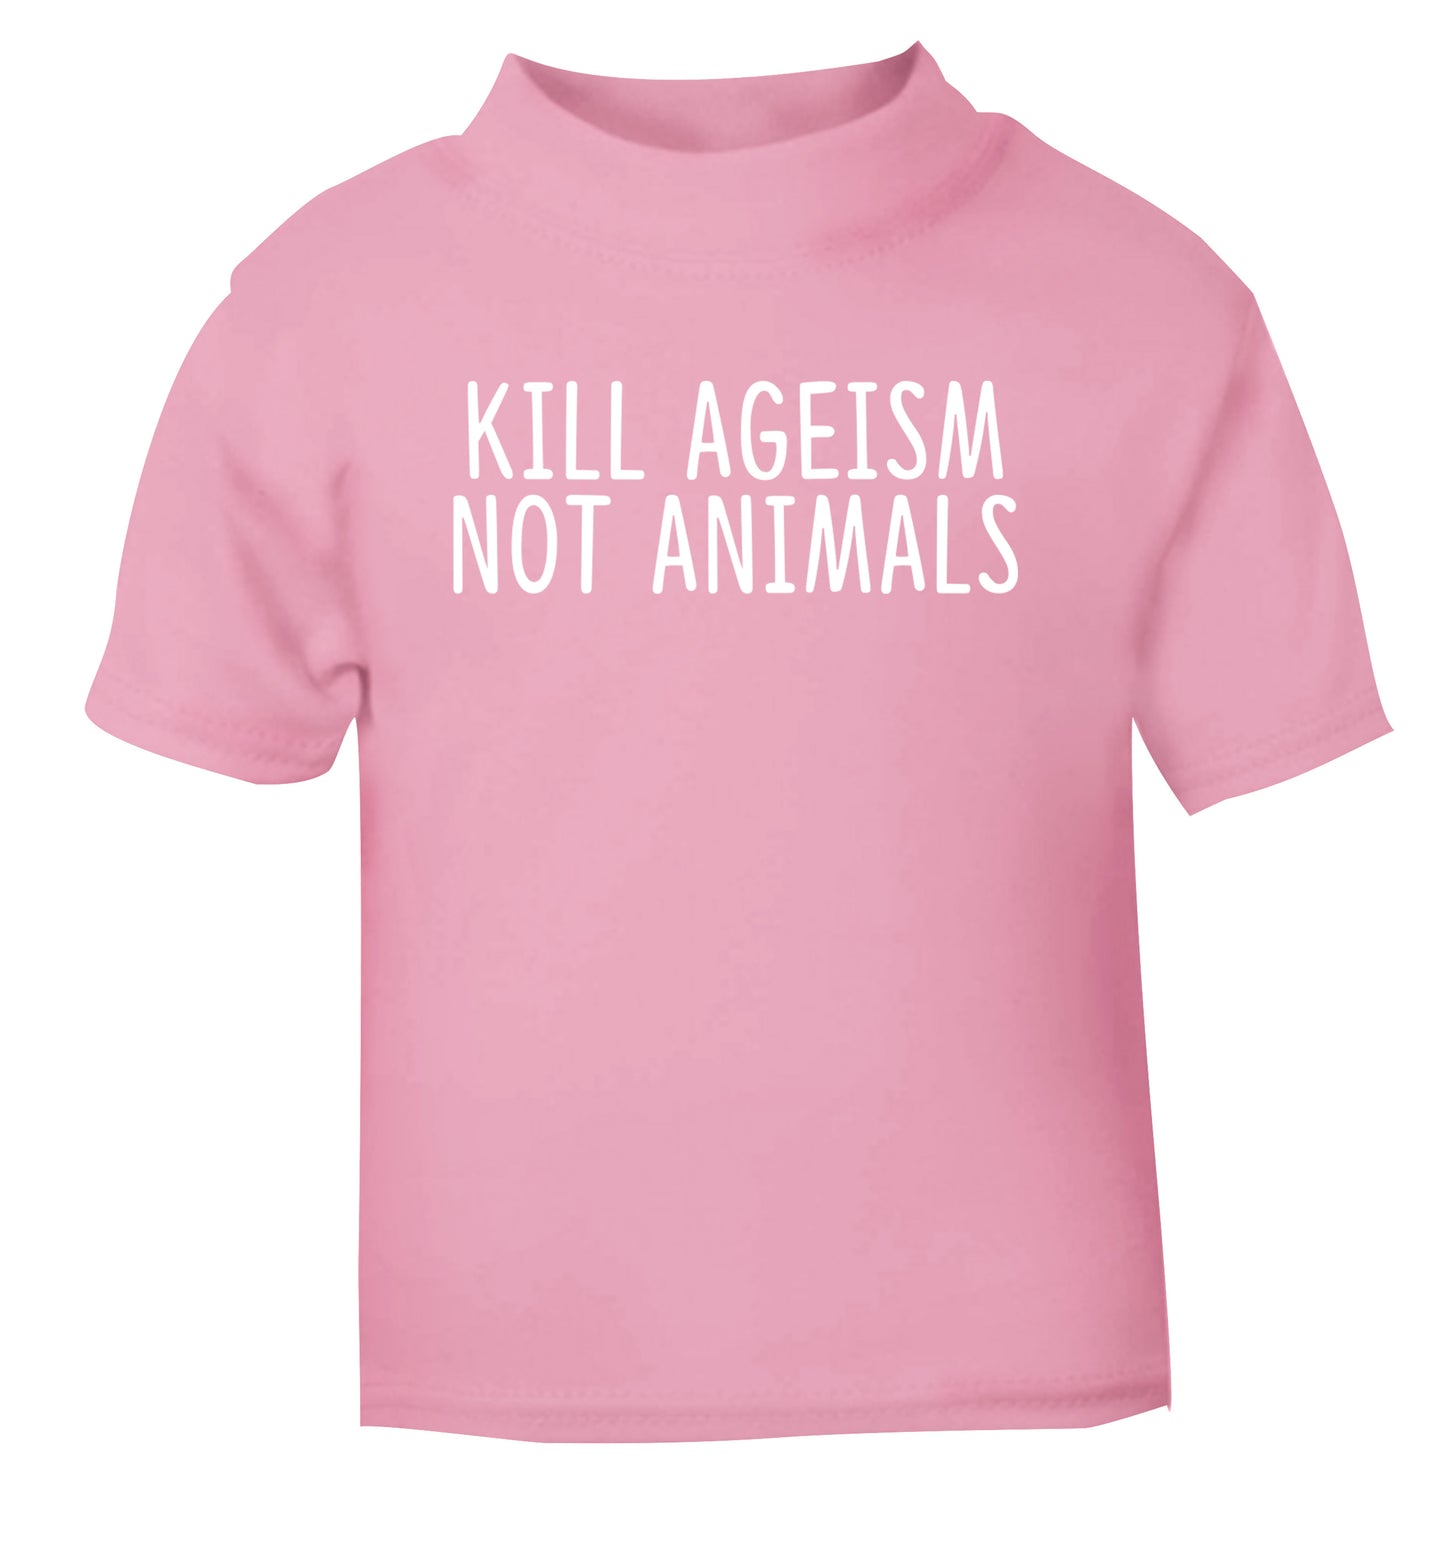 Kill Ageism Not Animals light pink Baby Toddler Tshirt 2 Years